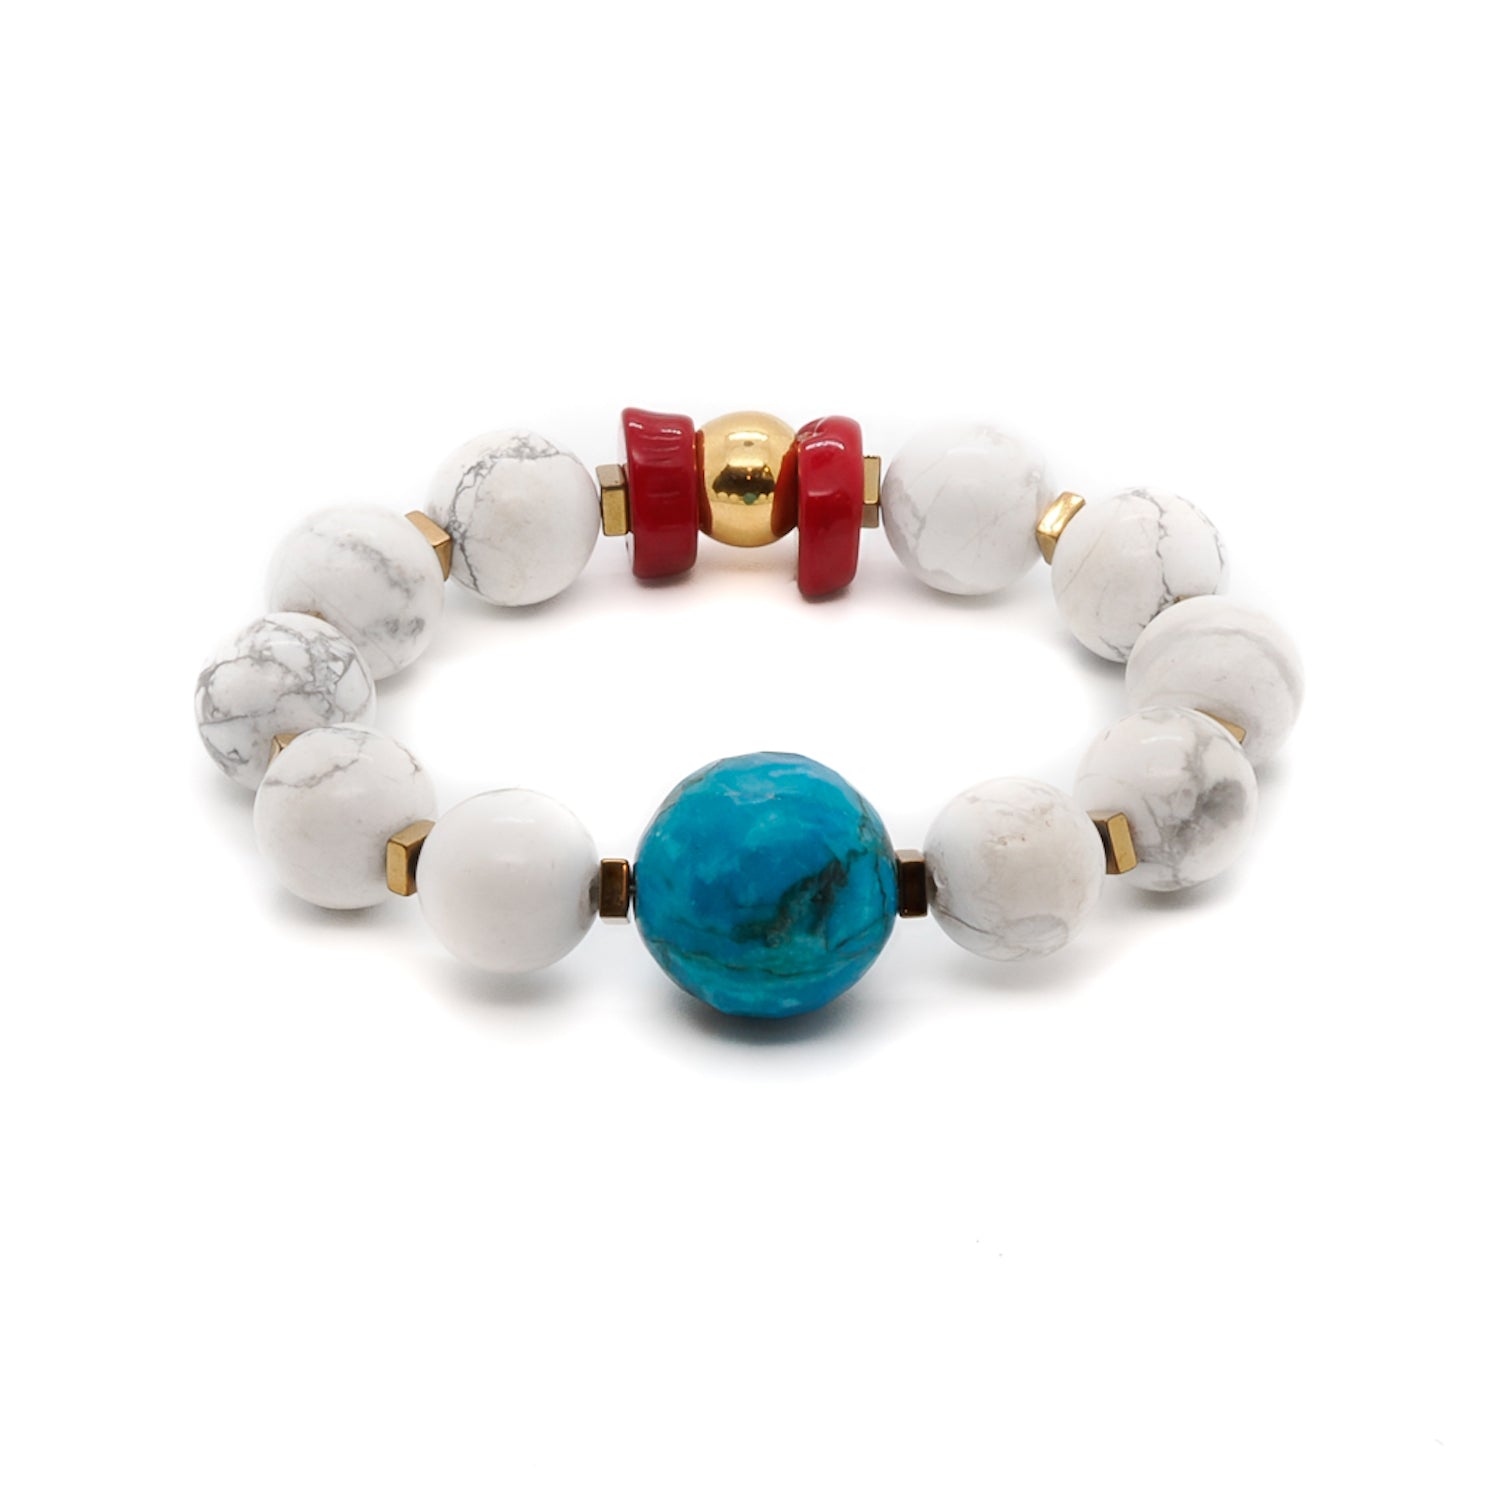 Add a touch of elegance to your style with the Turquoise Balance Bracelet, featuring turquoise, howlite, and red coral stone beads.